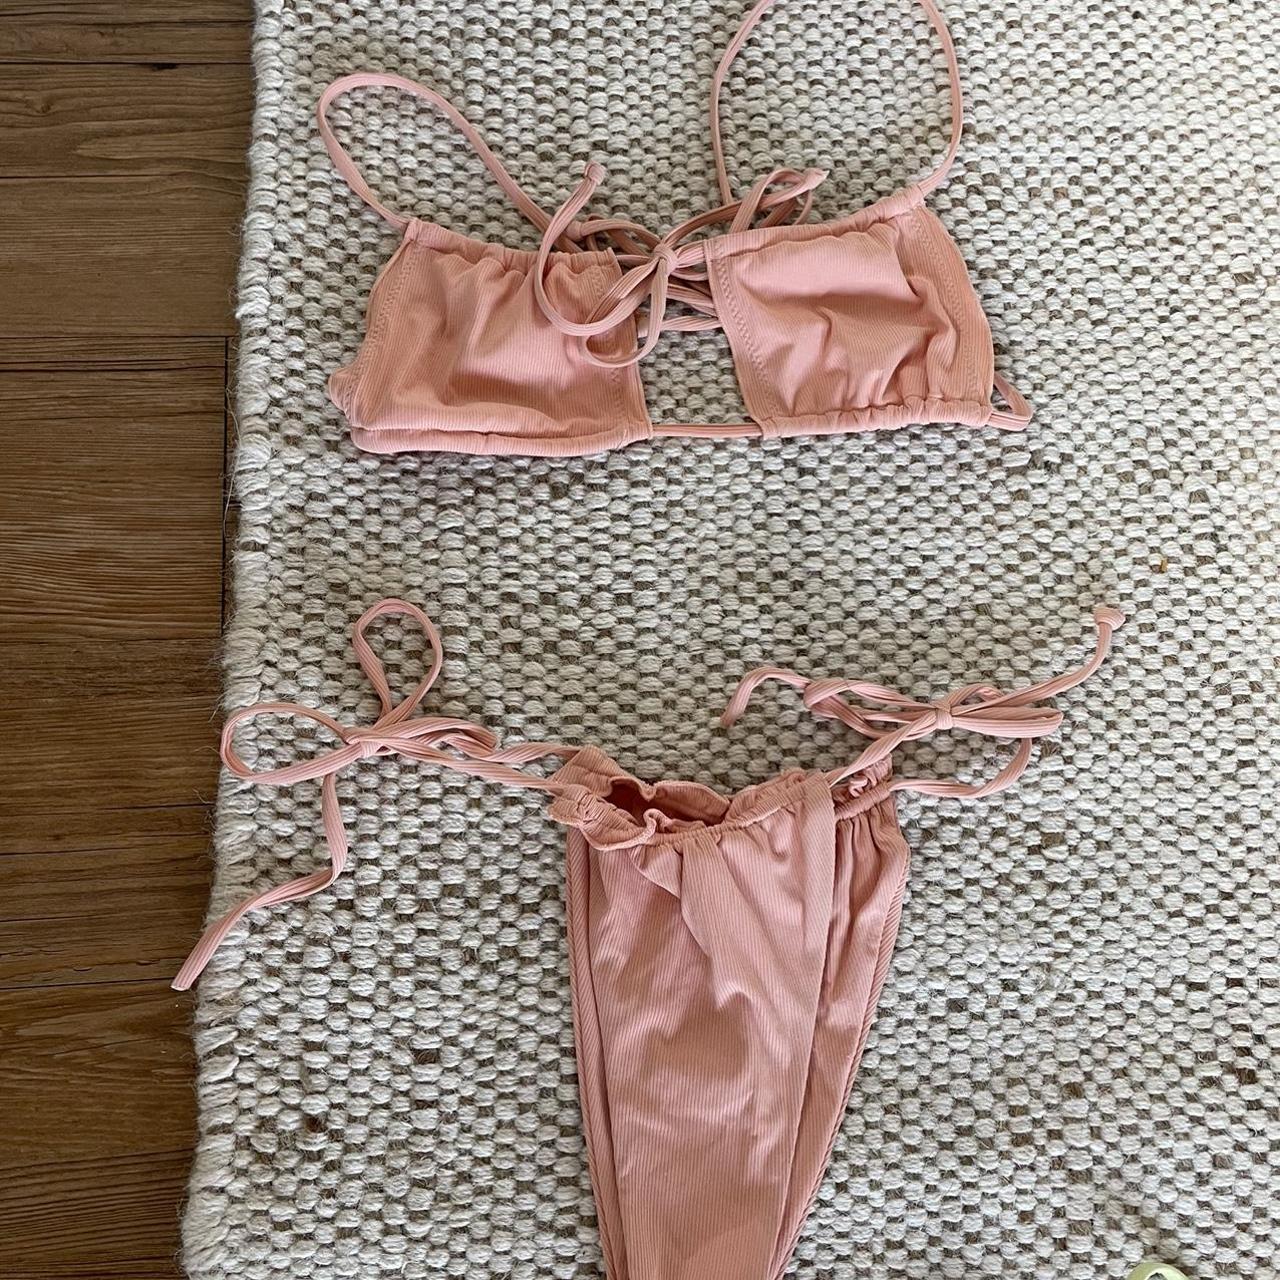 Product Image 1 - Pink Two piece swim suit